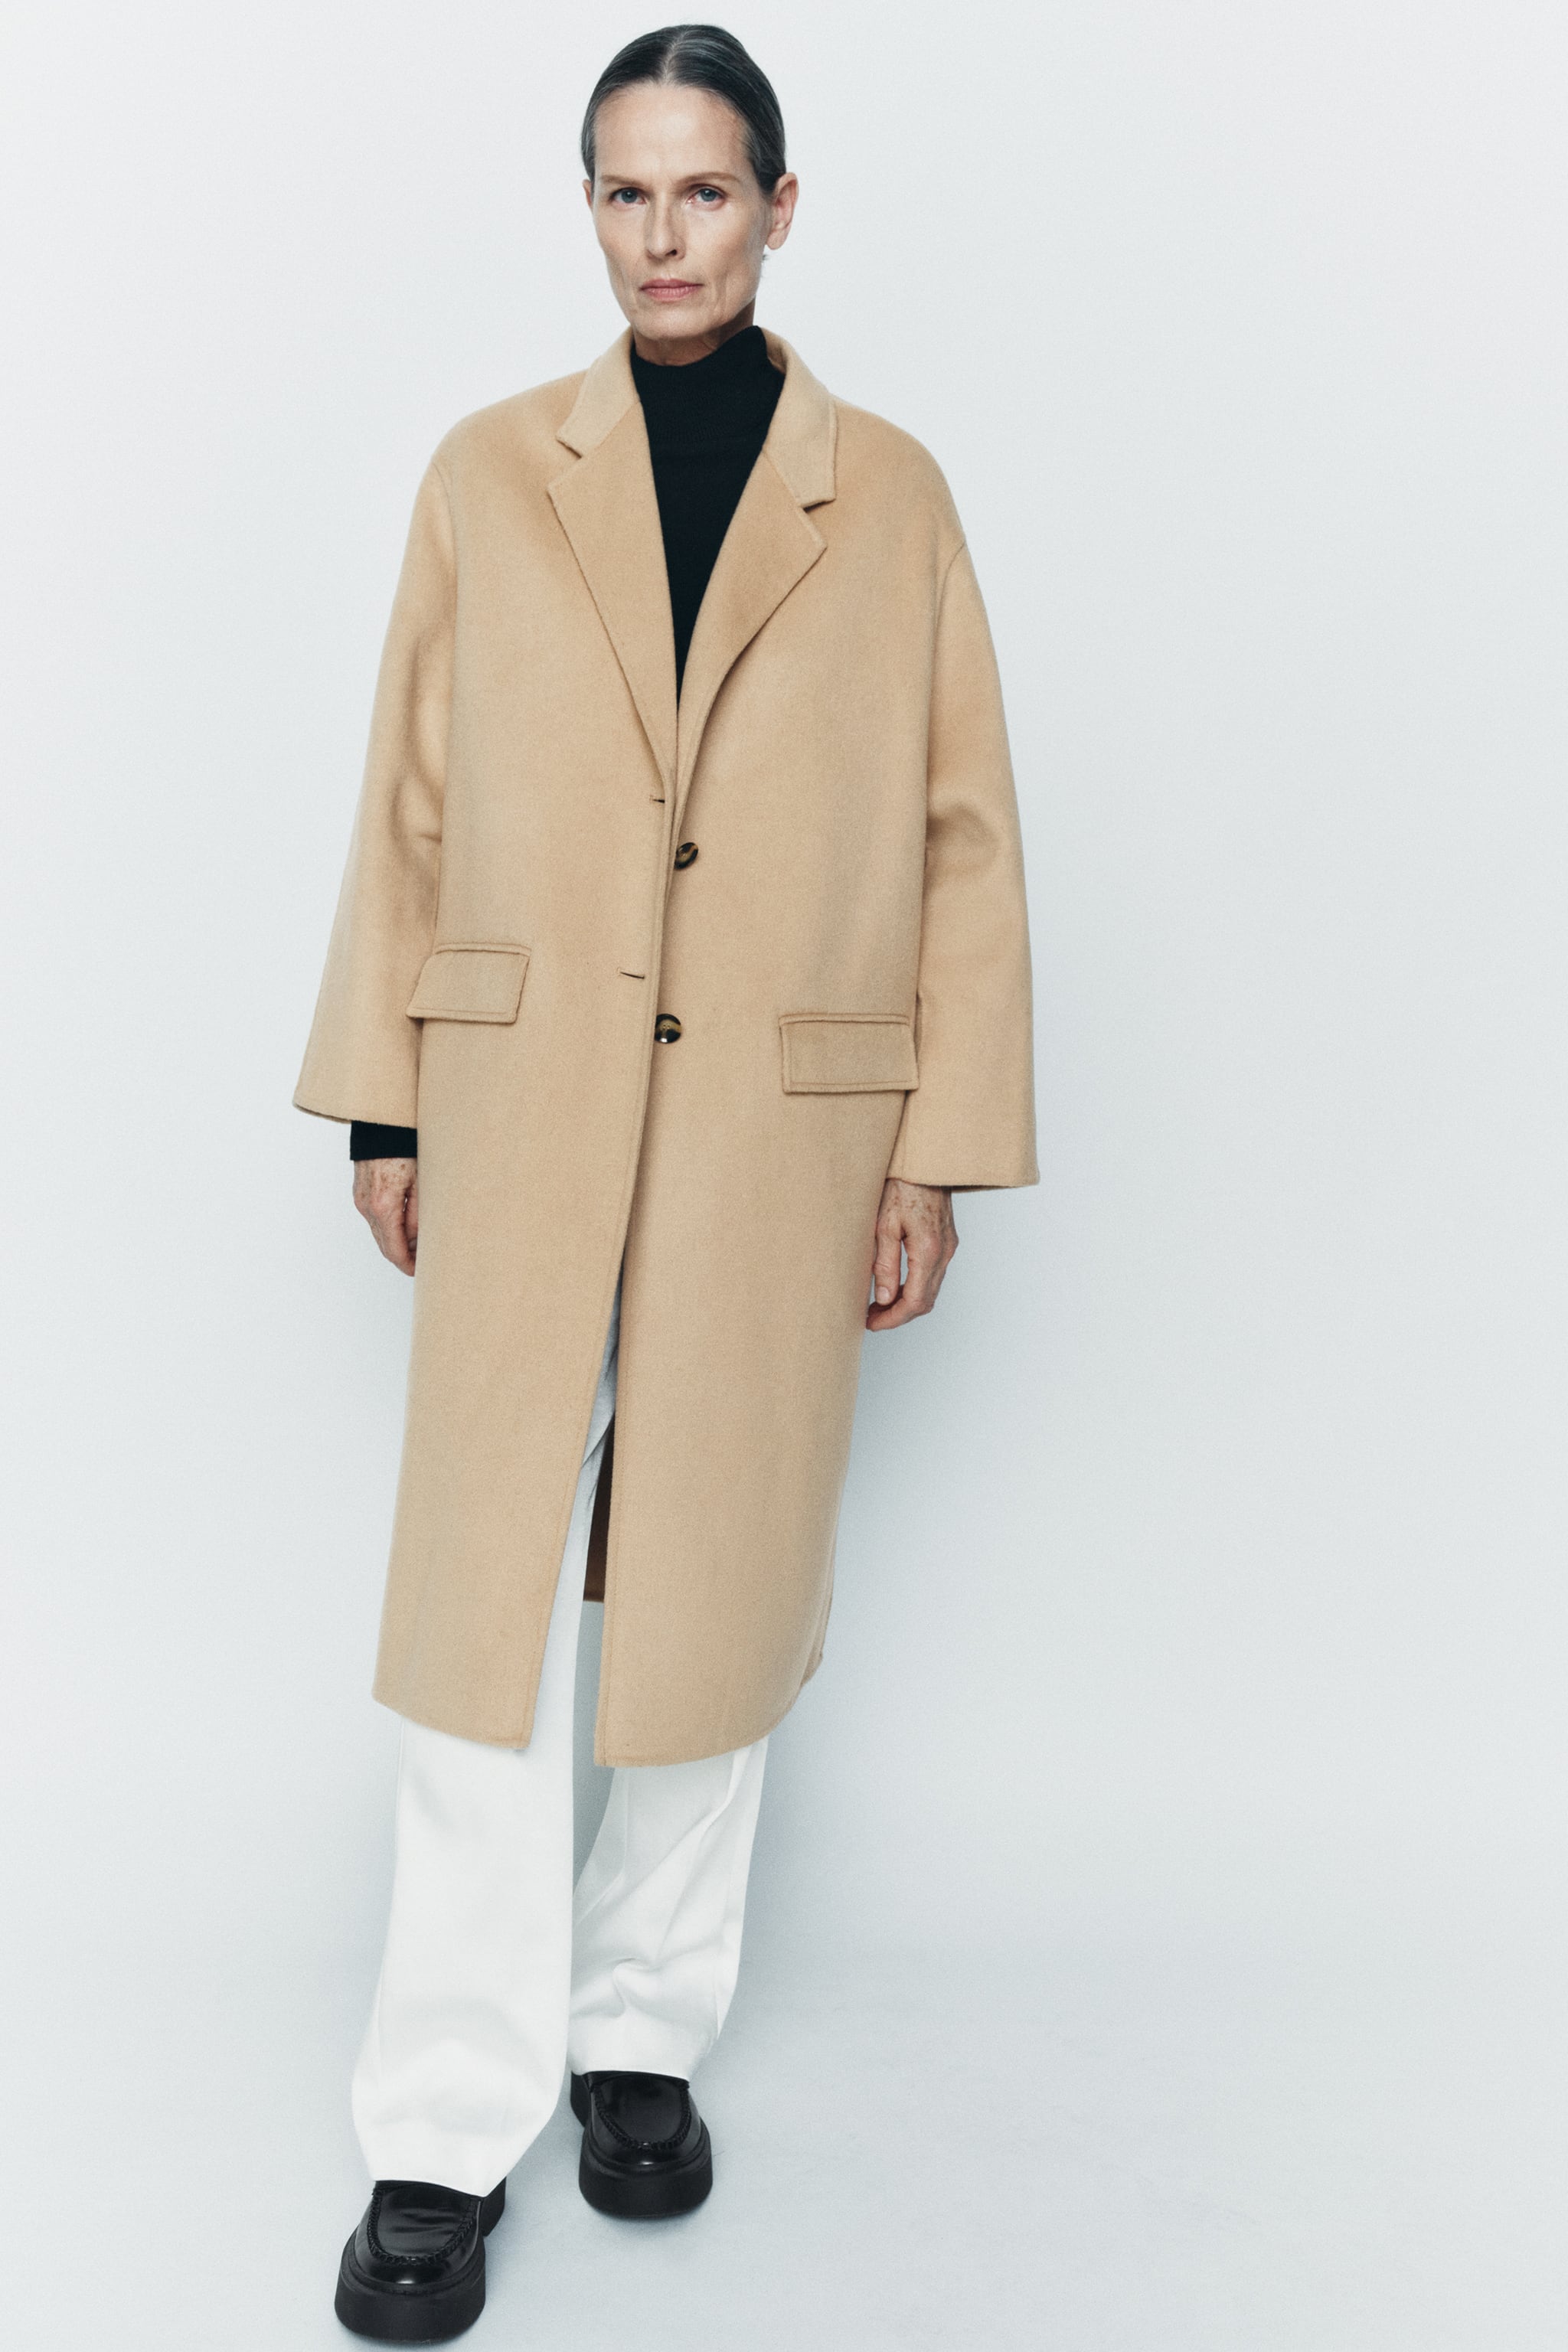 Zara DOUBLE FACED WOOL BLEND COAT ZW COLLECTION | Mall of America®